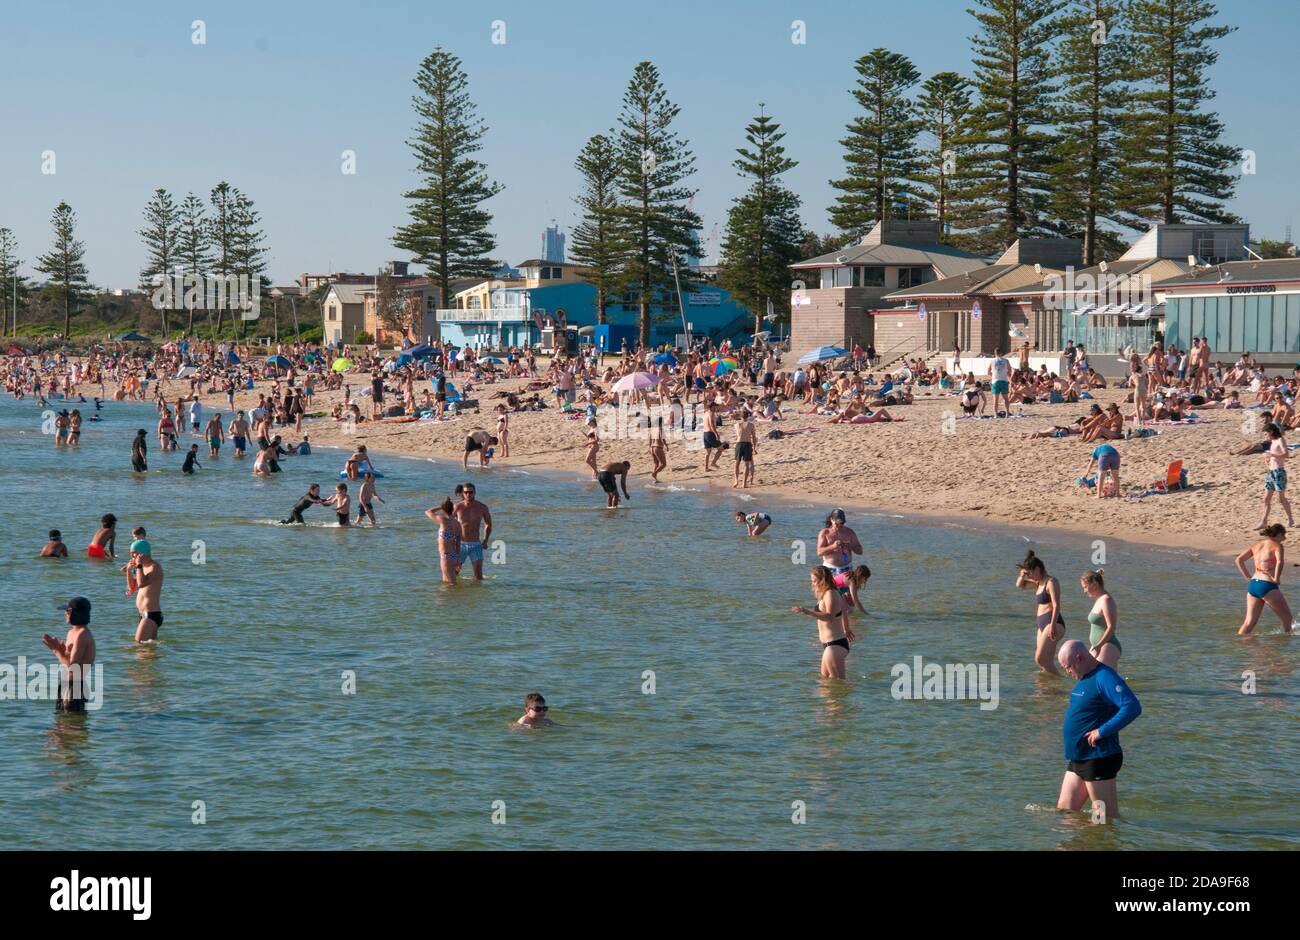 Residents crowd onto Elwood Beach on the first hot day after the lifting of strict COViD-19 lockdown restrictions in Melbourne, Victoria, Australia Stock Photo